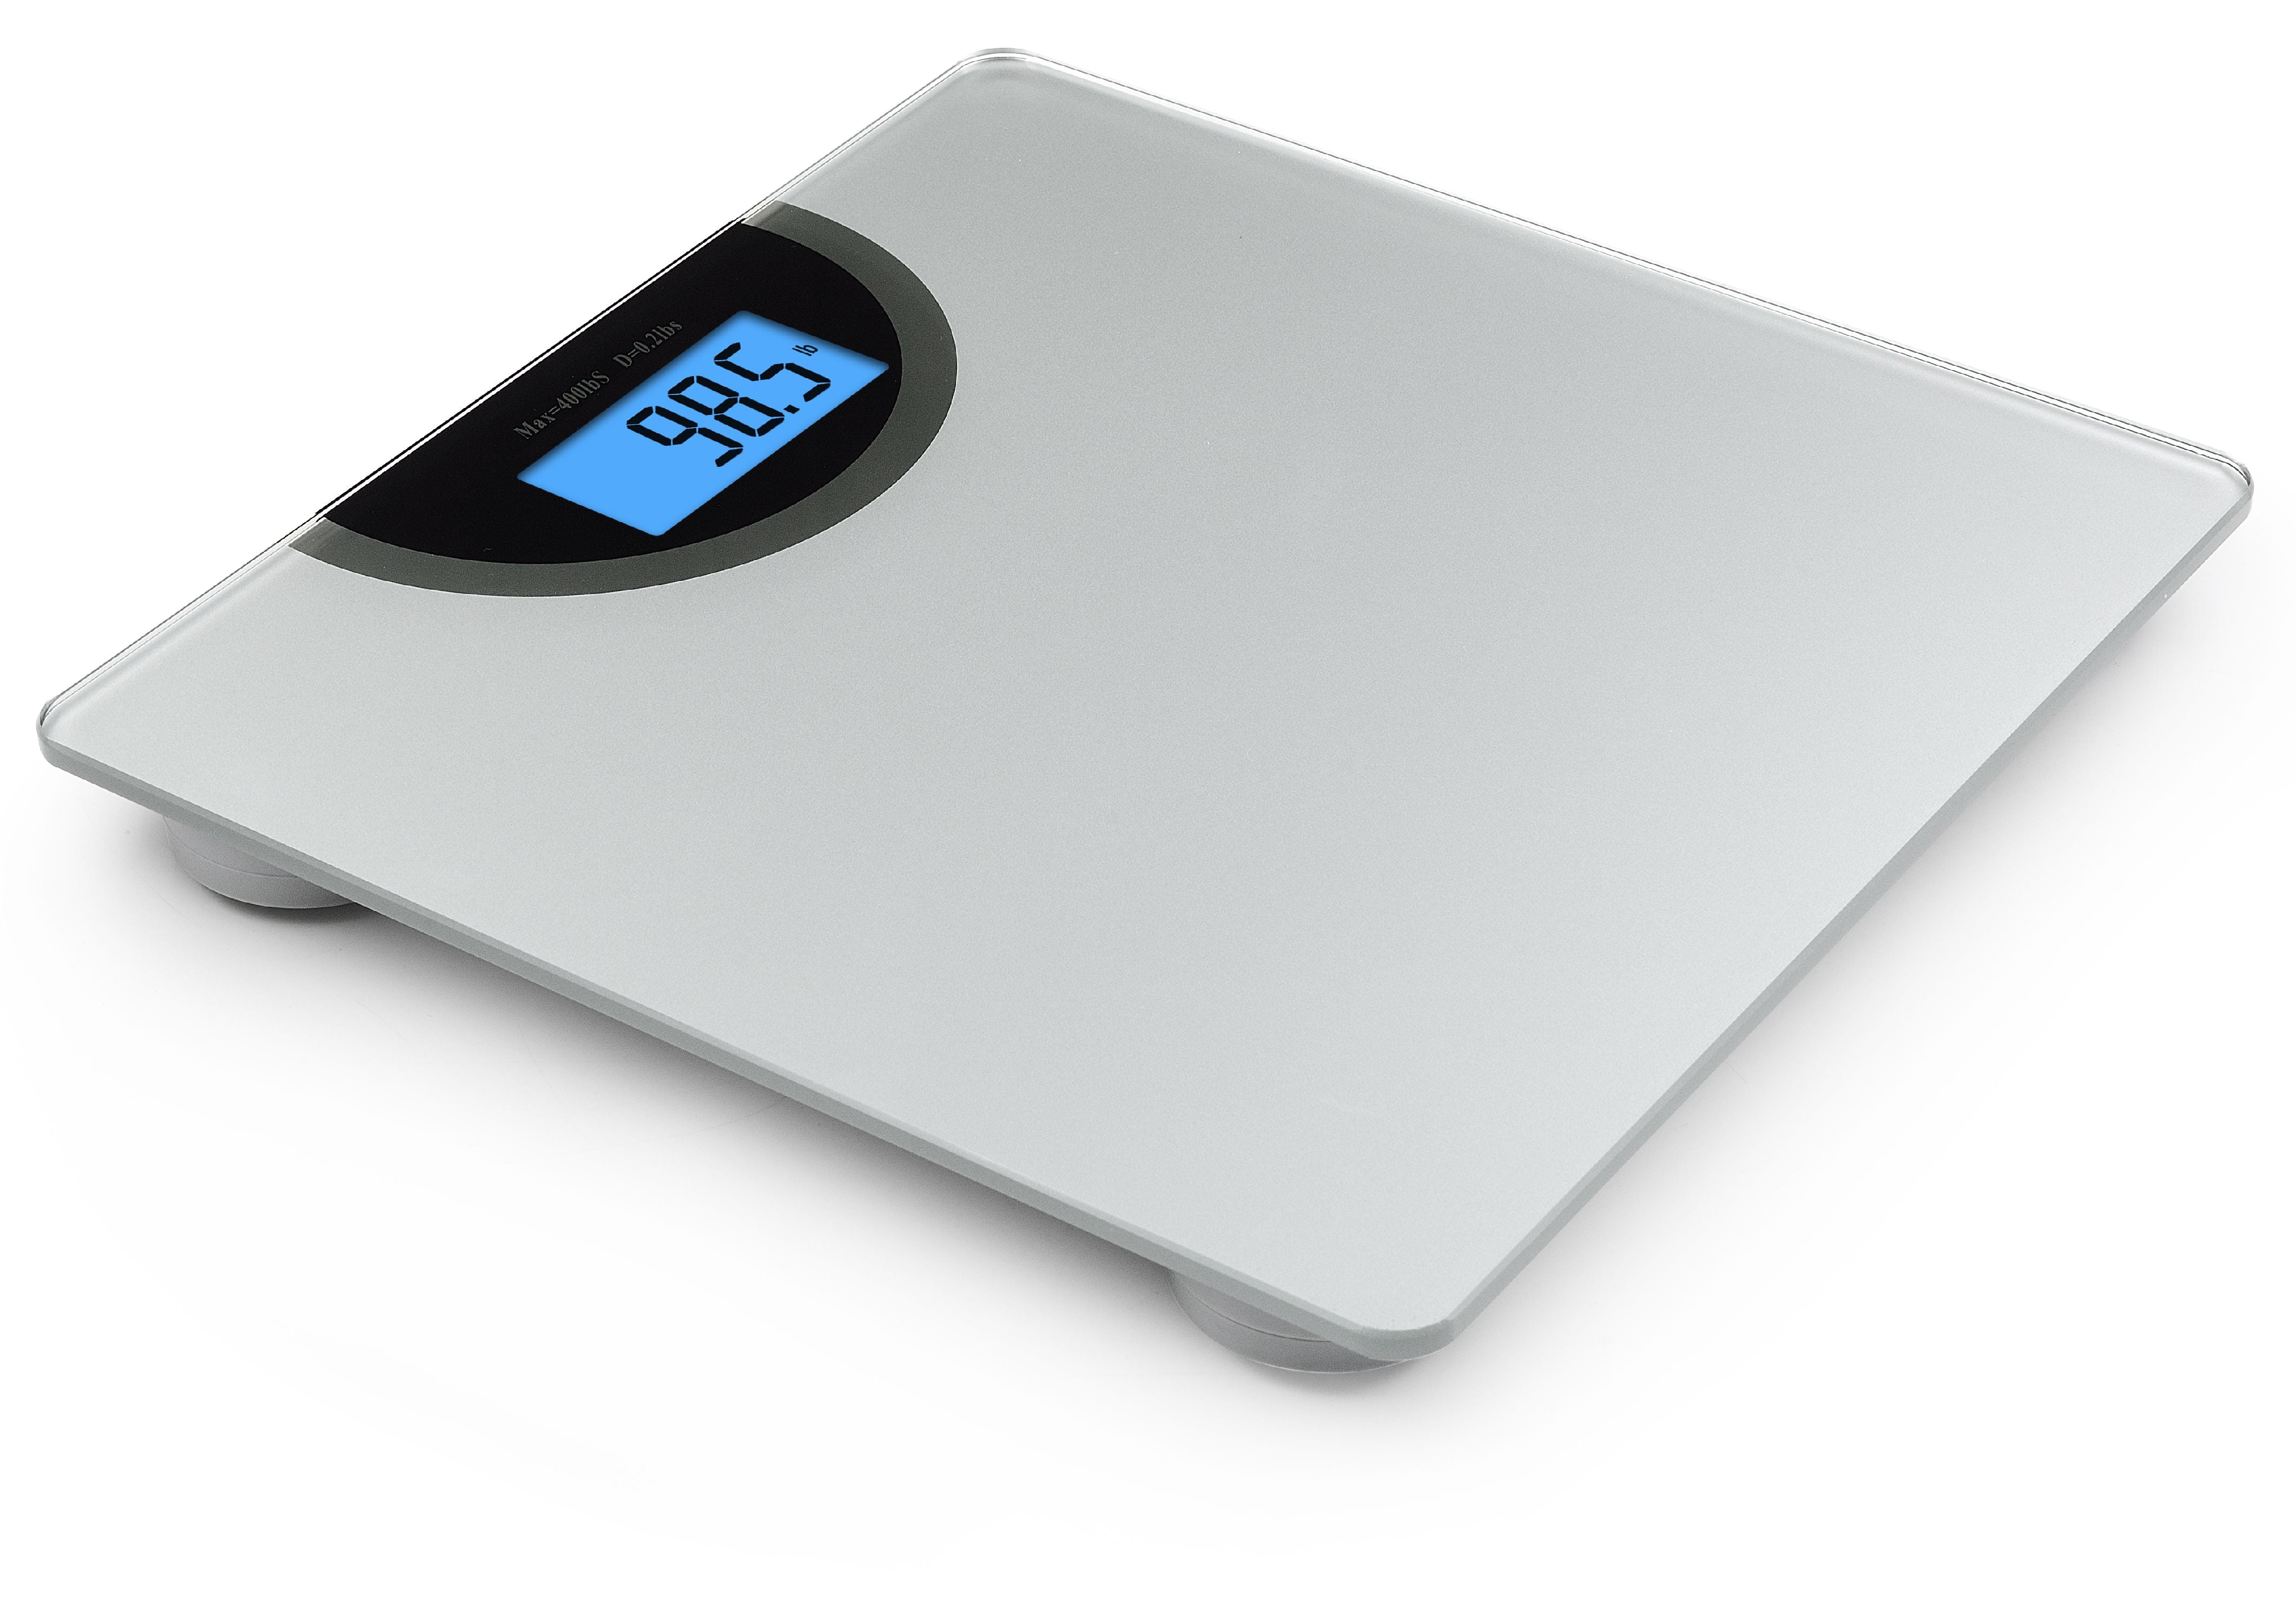 1byone Digital Body Weight Scale Bathroom Scale with Step-on